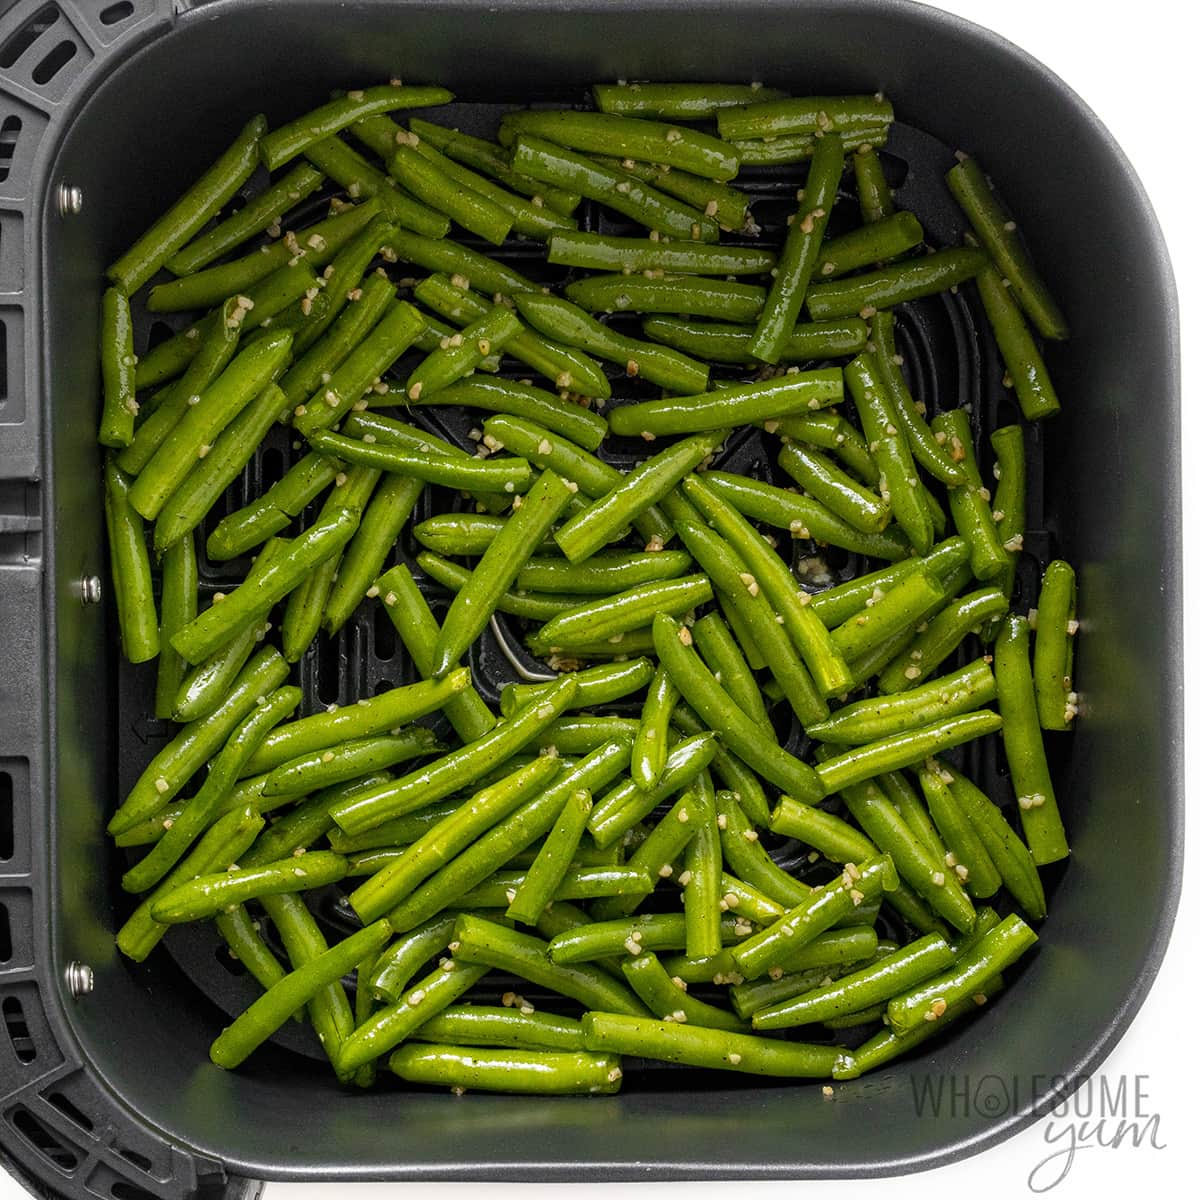 Seasoned green beans in the fryer basket before being cooked.